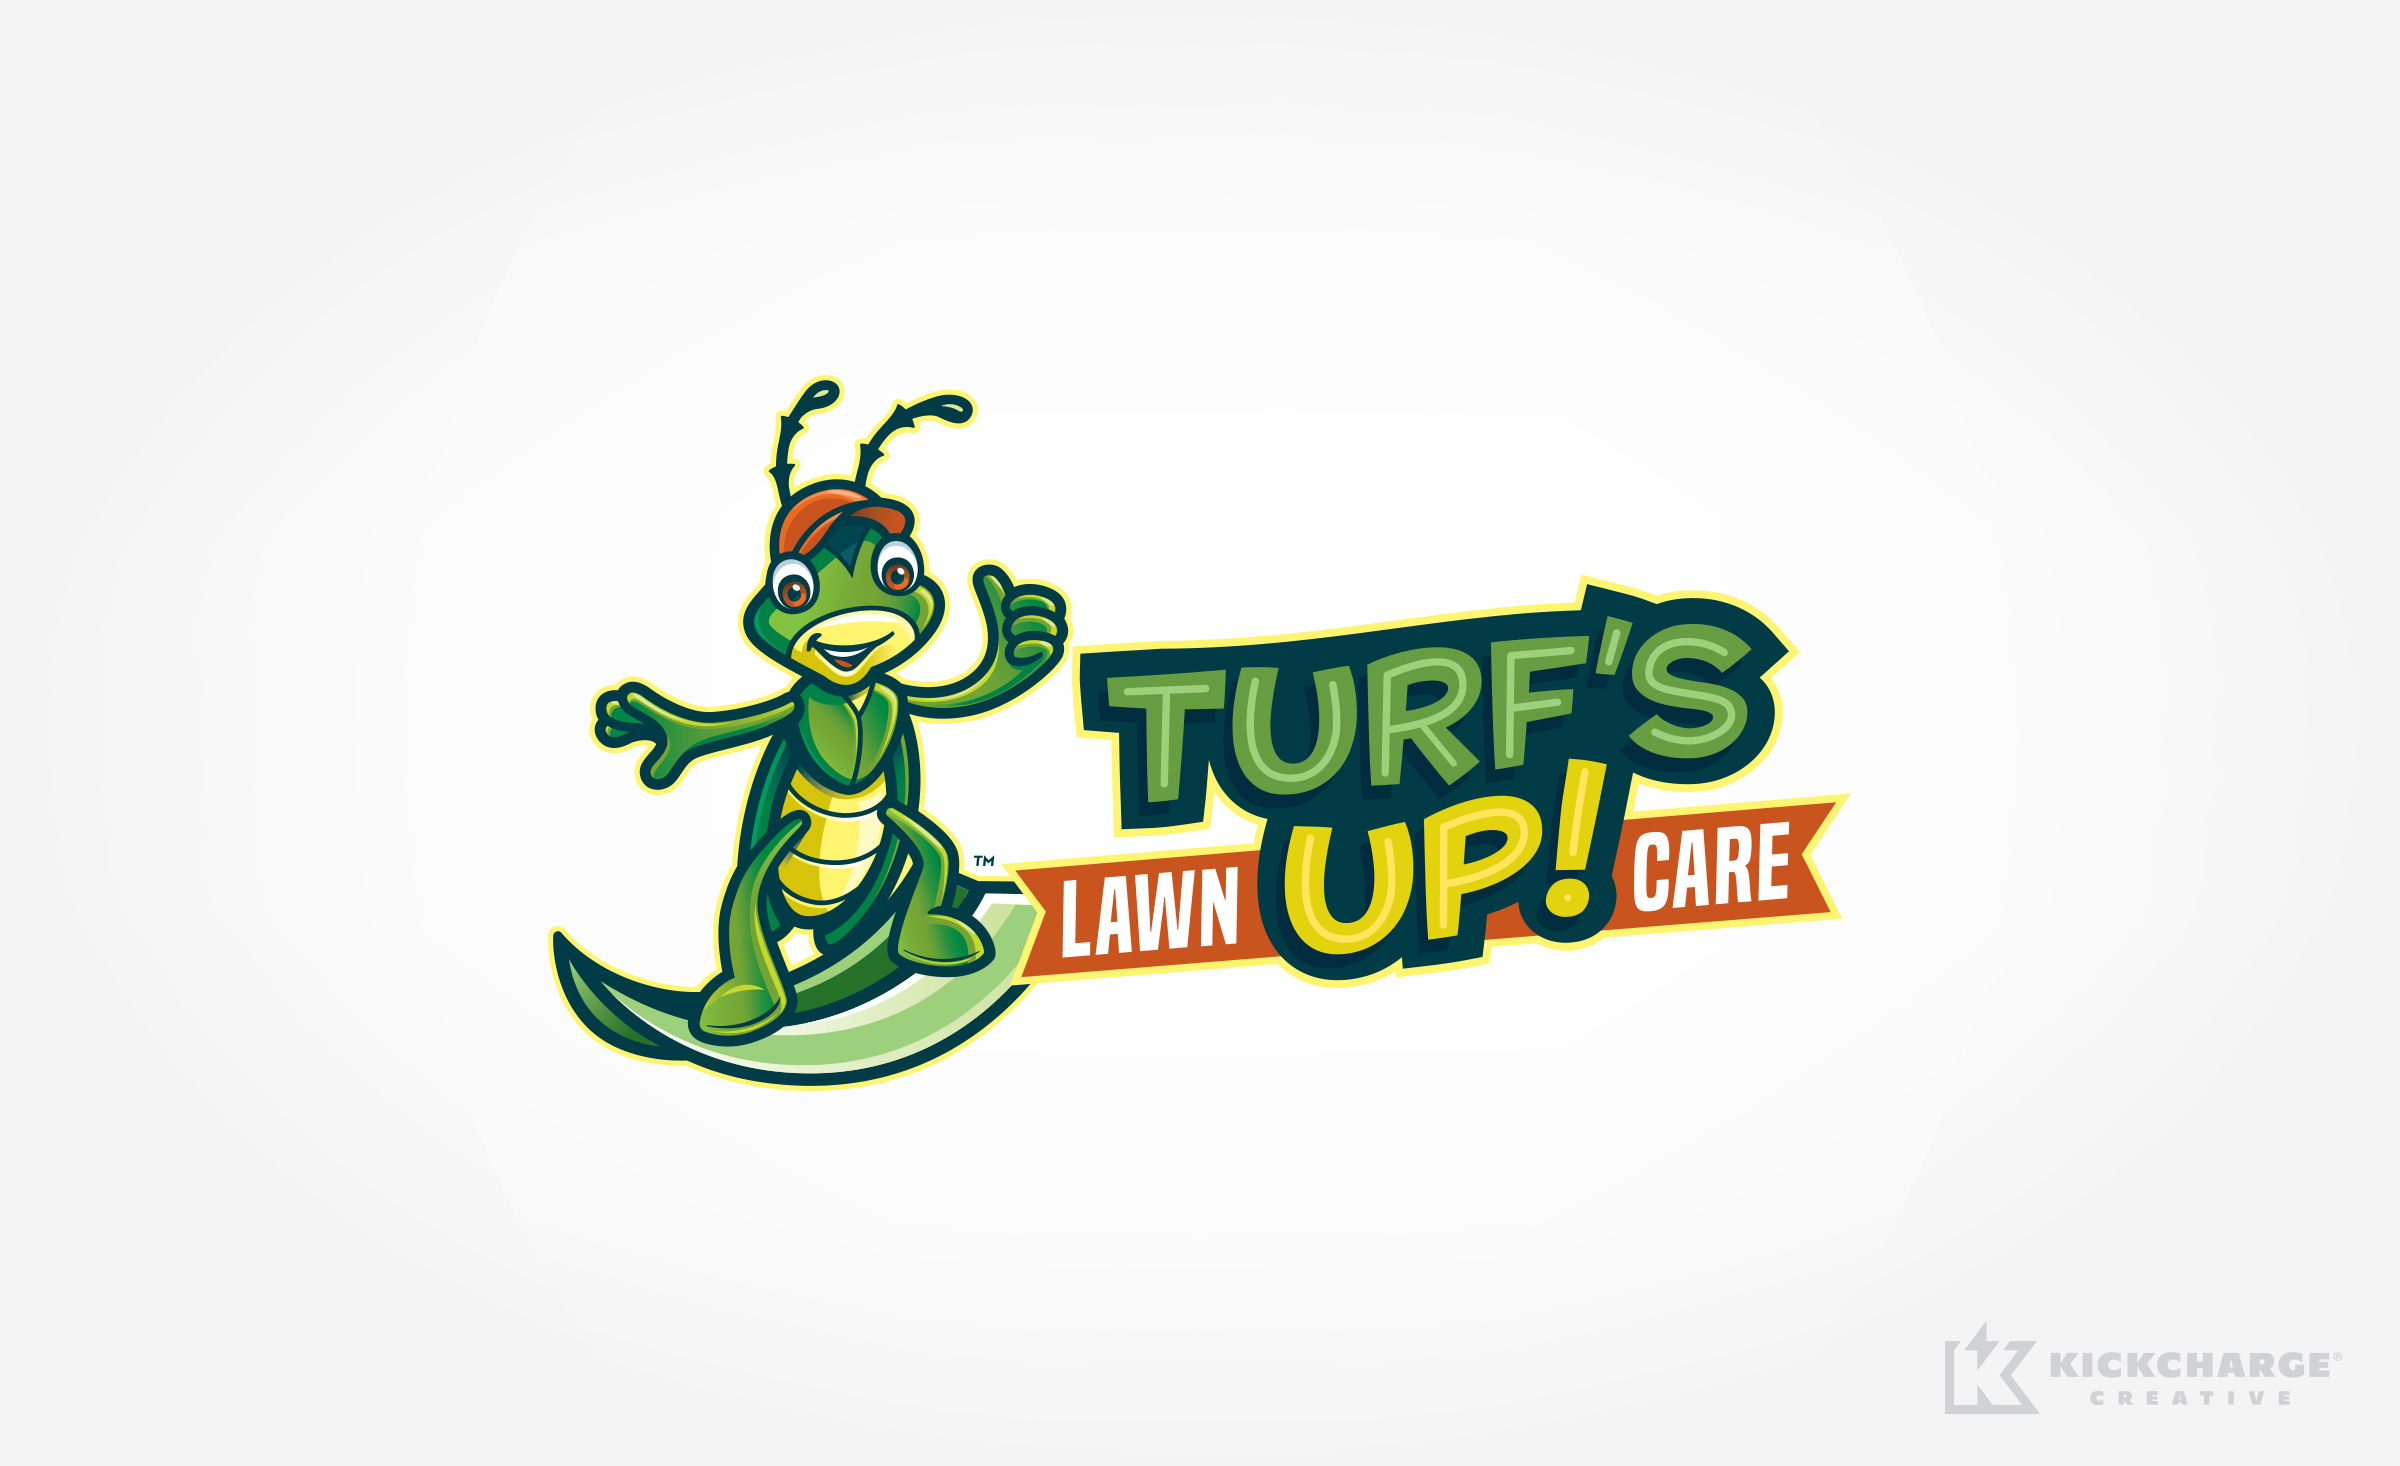 Turf's Up! Lawn Care